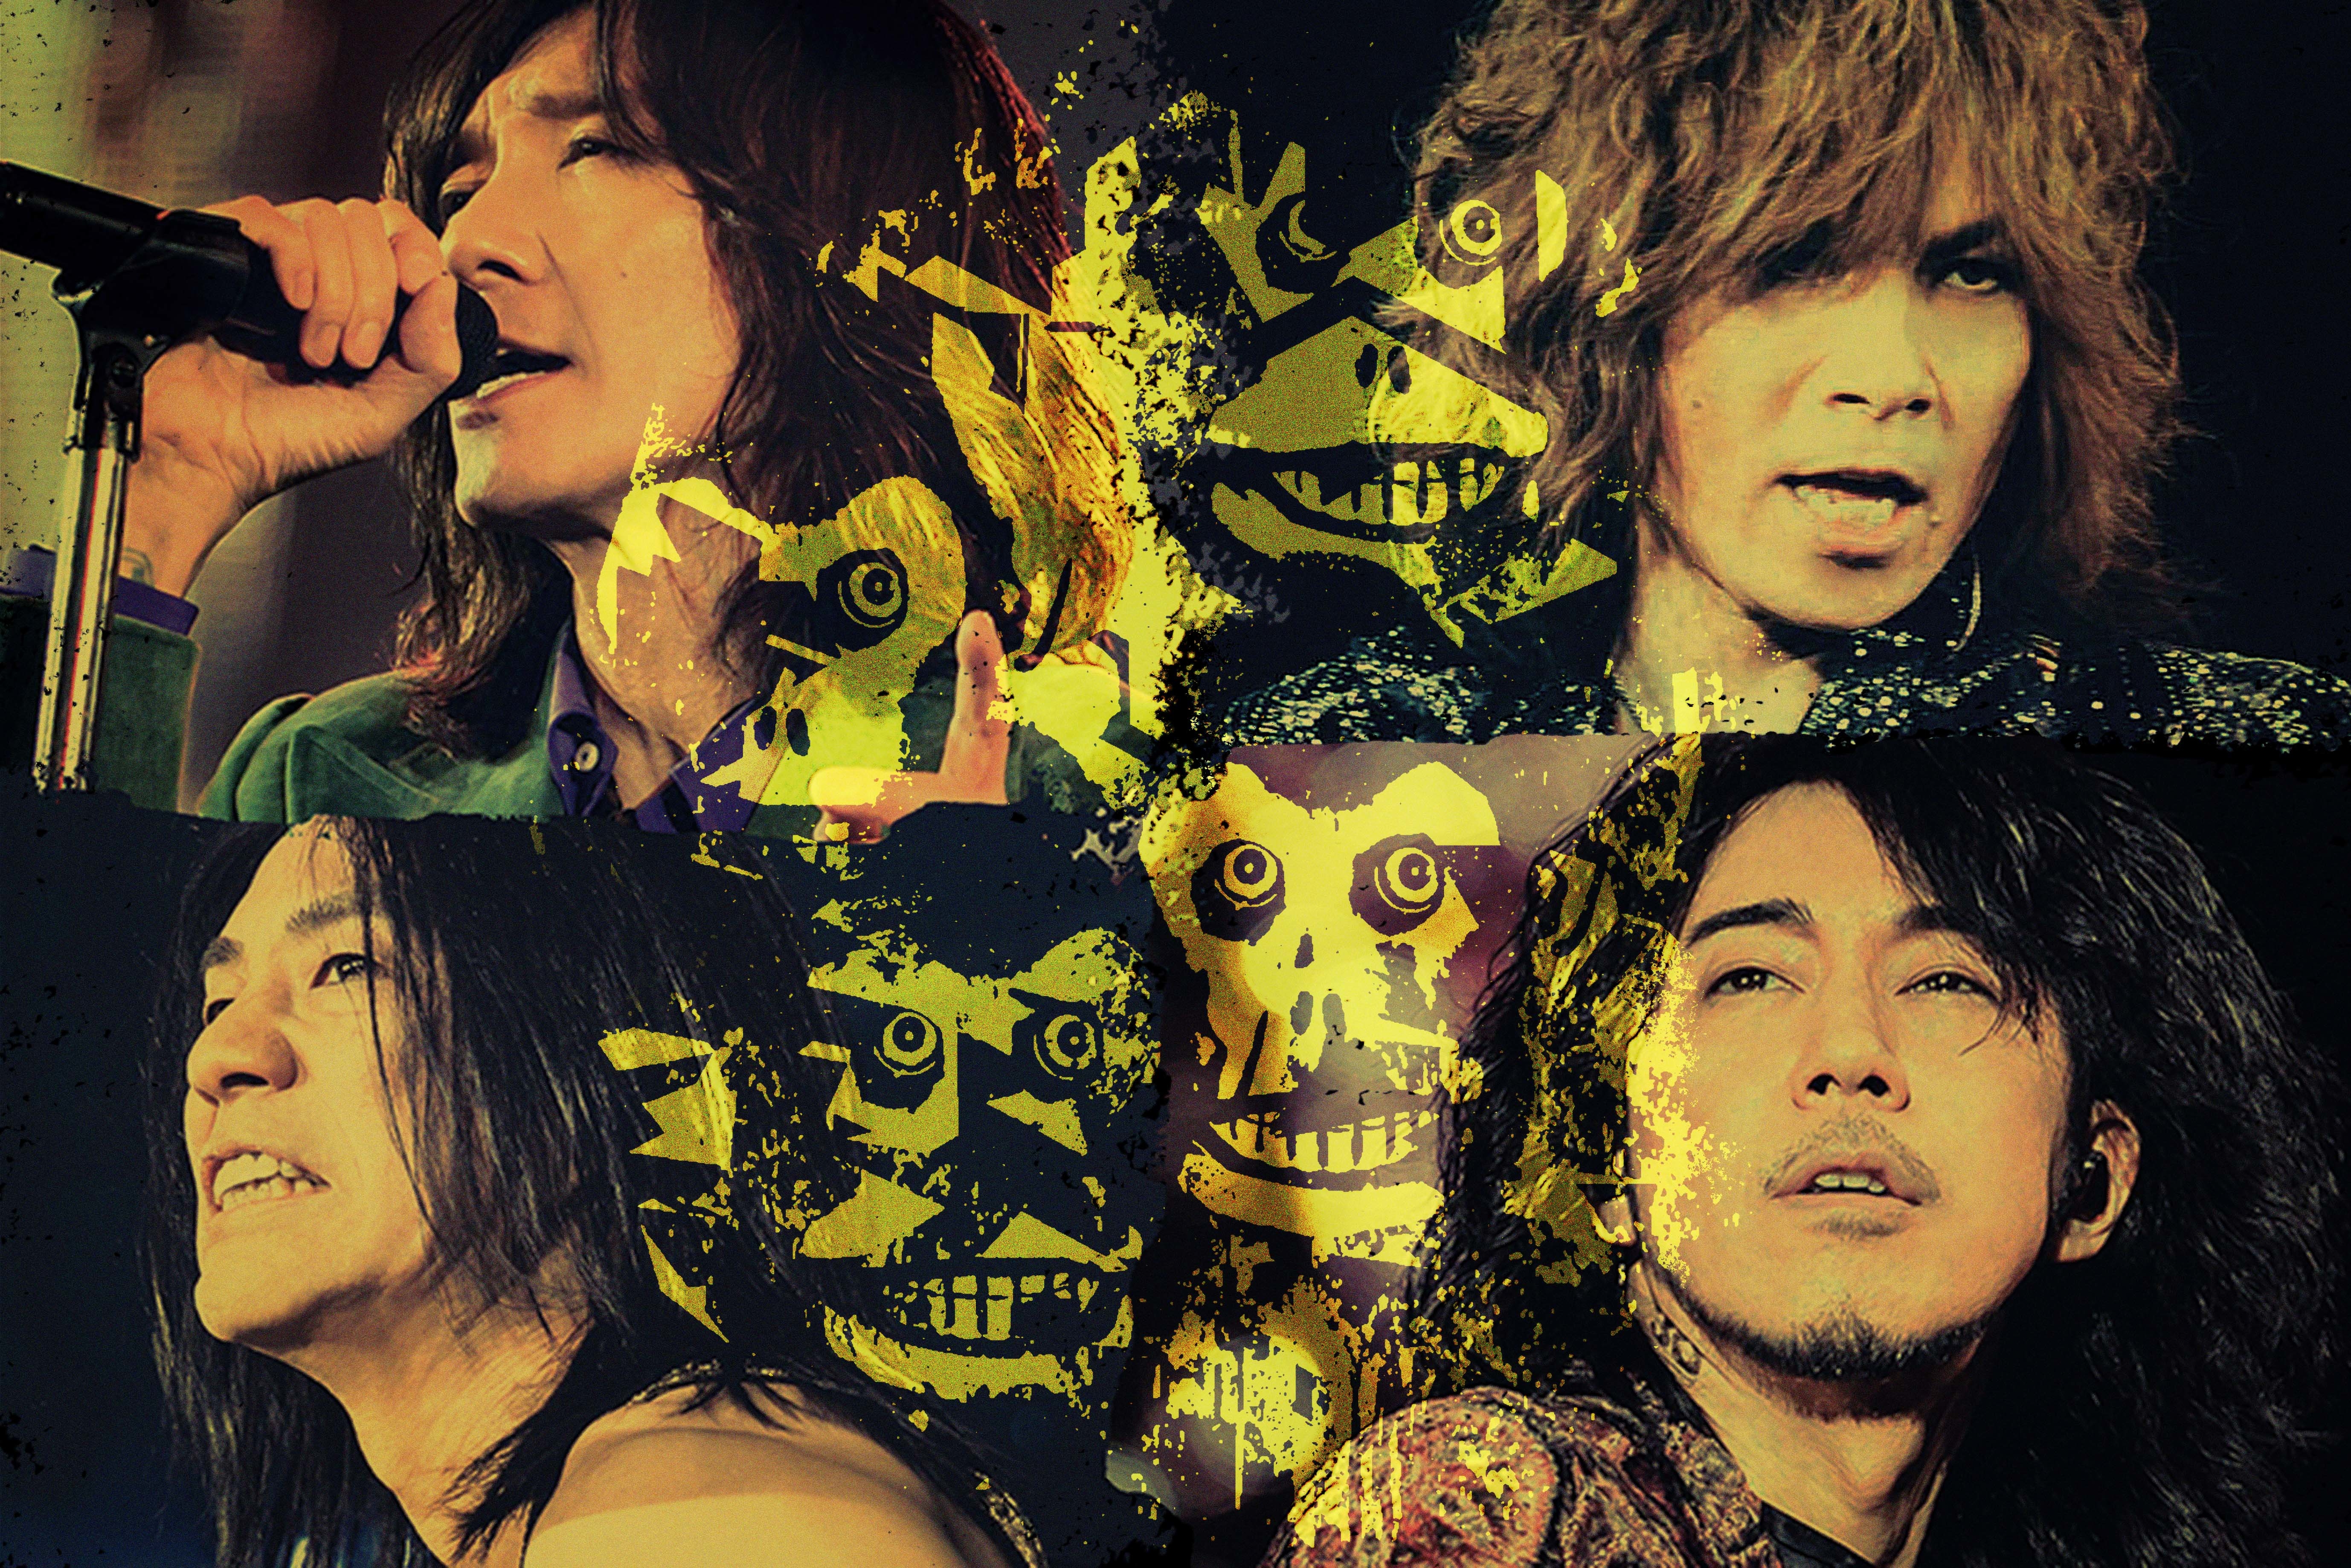 THE YELLOW MONKEY
30th Anniversary LIVE
-DOME SPECIAL-